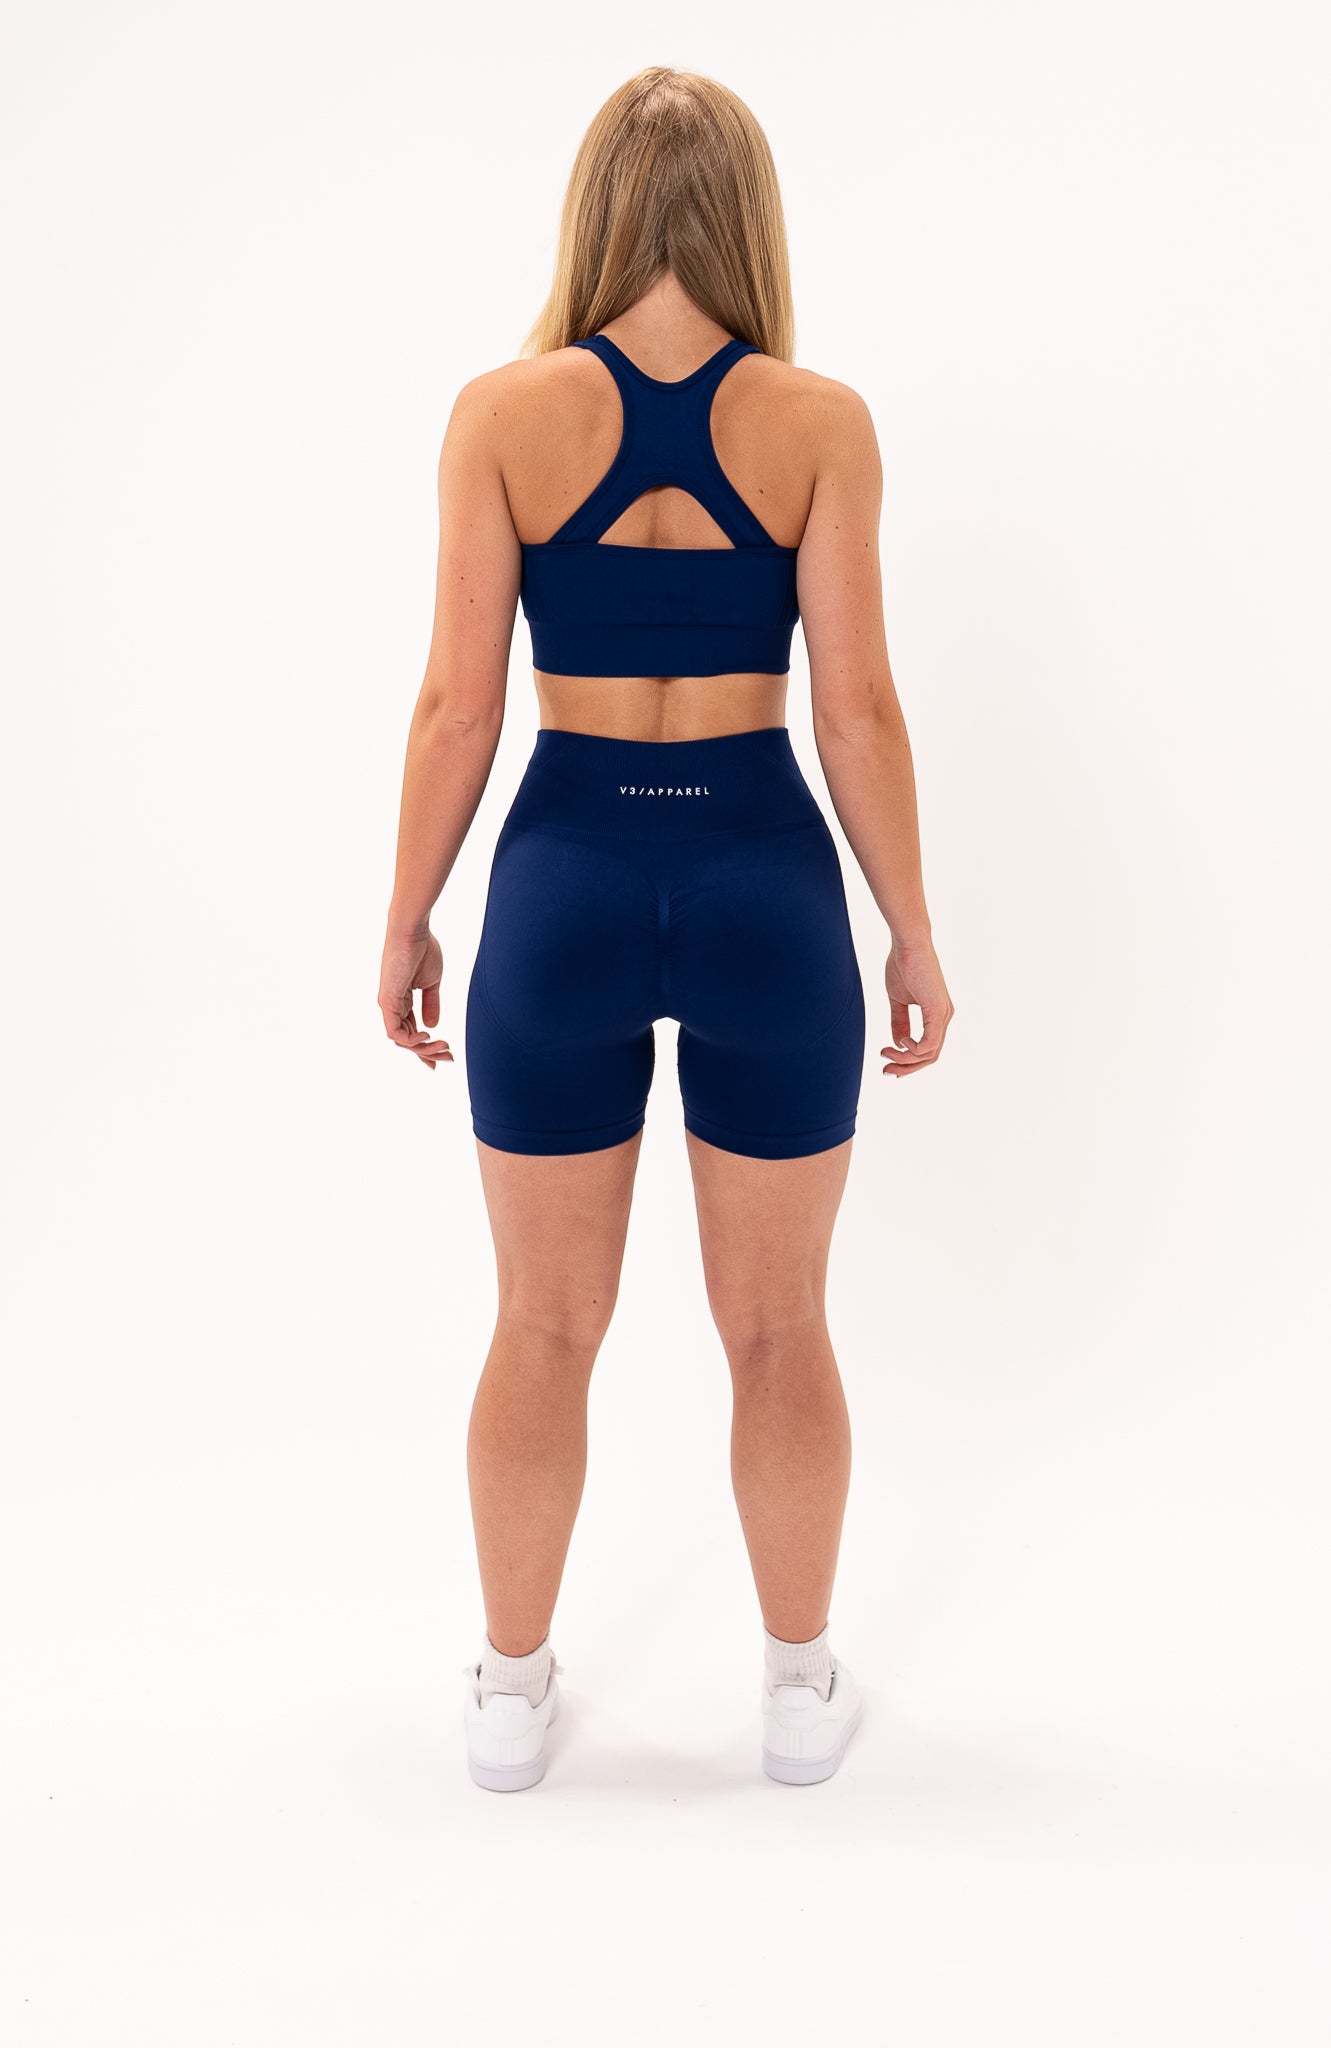 V3 Apparel Women's Tempo seamless scrunch bum shaping high waisted shorts and training sports bra in royal blue – Squat proof 5 inch leg cycle shorts and training bra for Gym workouts training, Running, yoga, bodybuilding and bikini fitness.